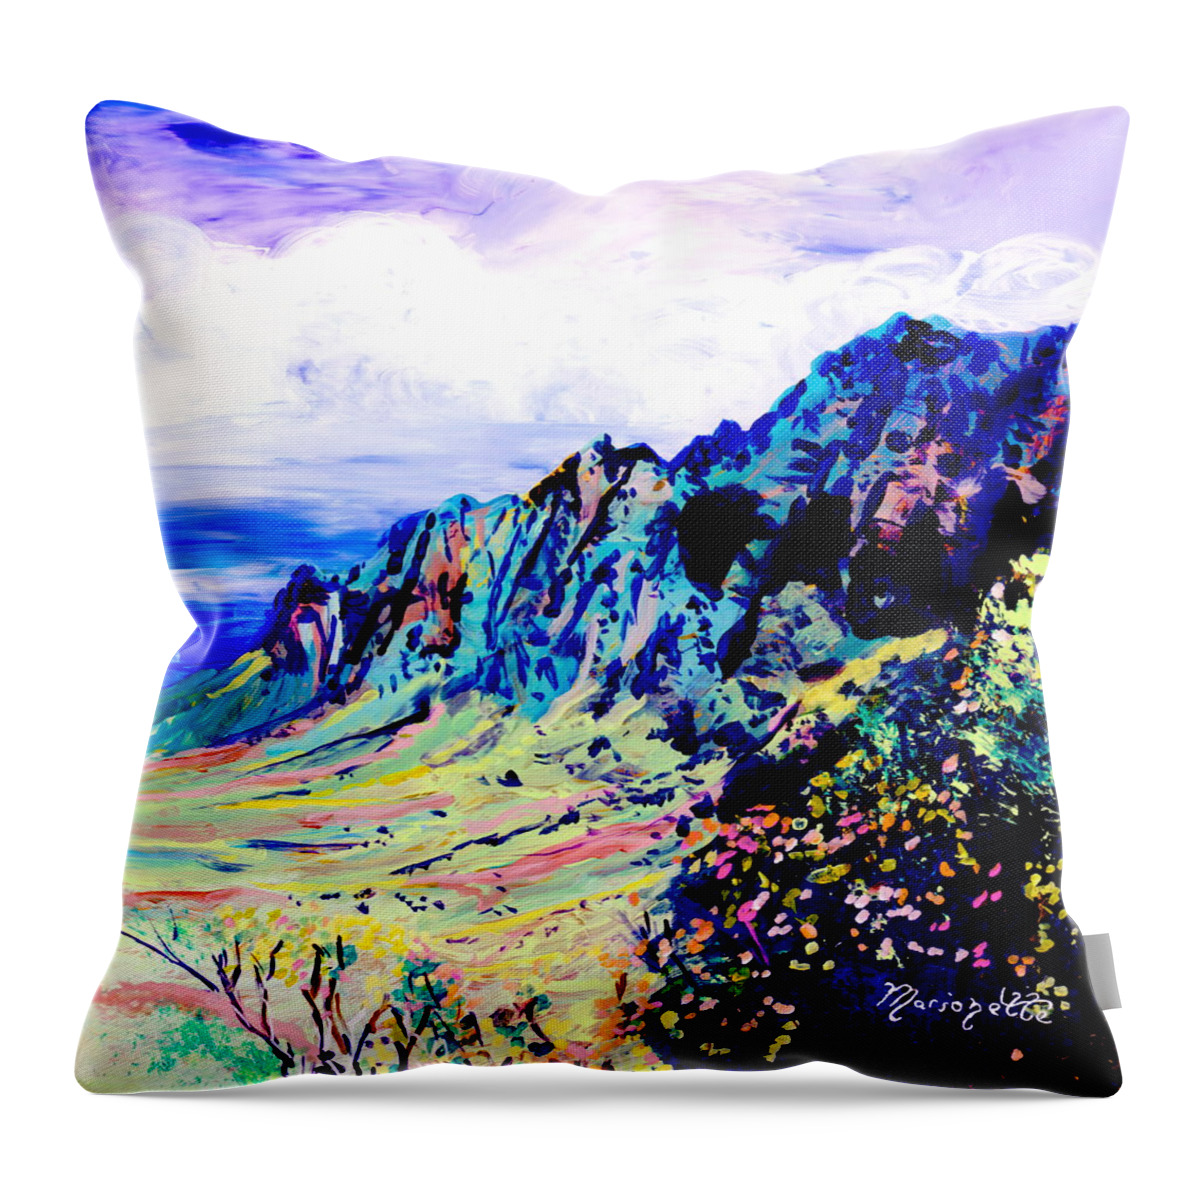 Kalalau Valley Throw Pillow featuring the painting Kalalau Valley 4 by Marionette Taboniar